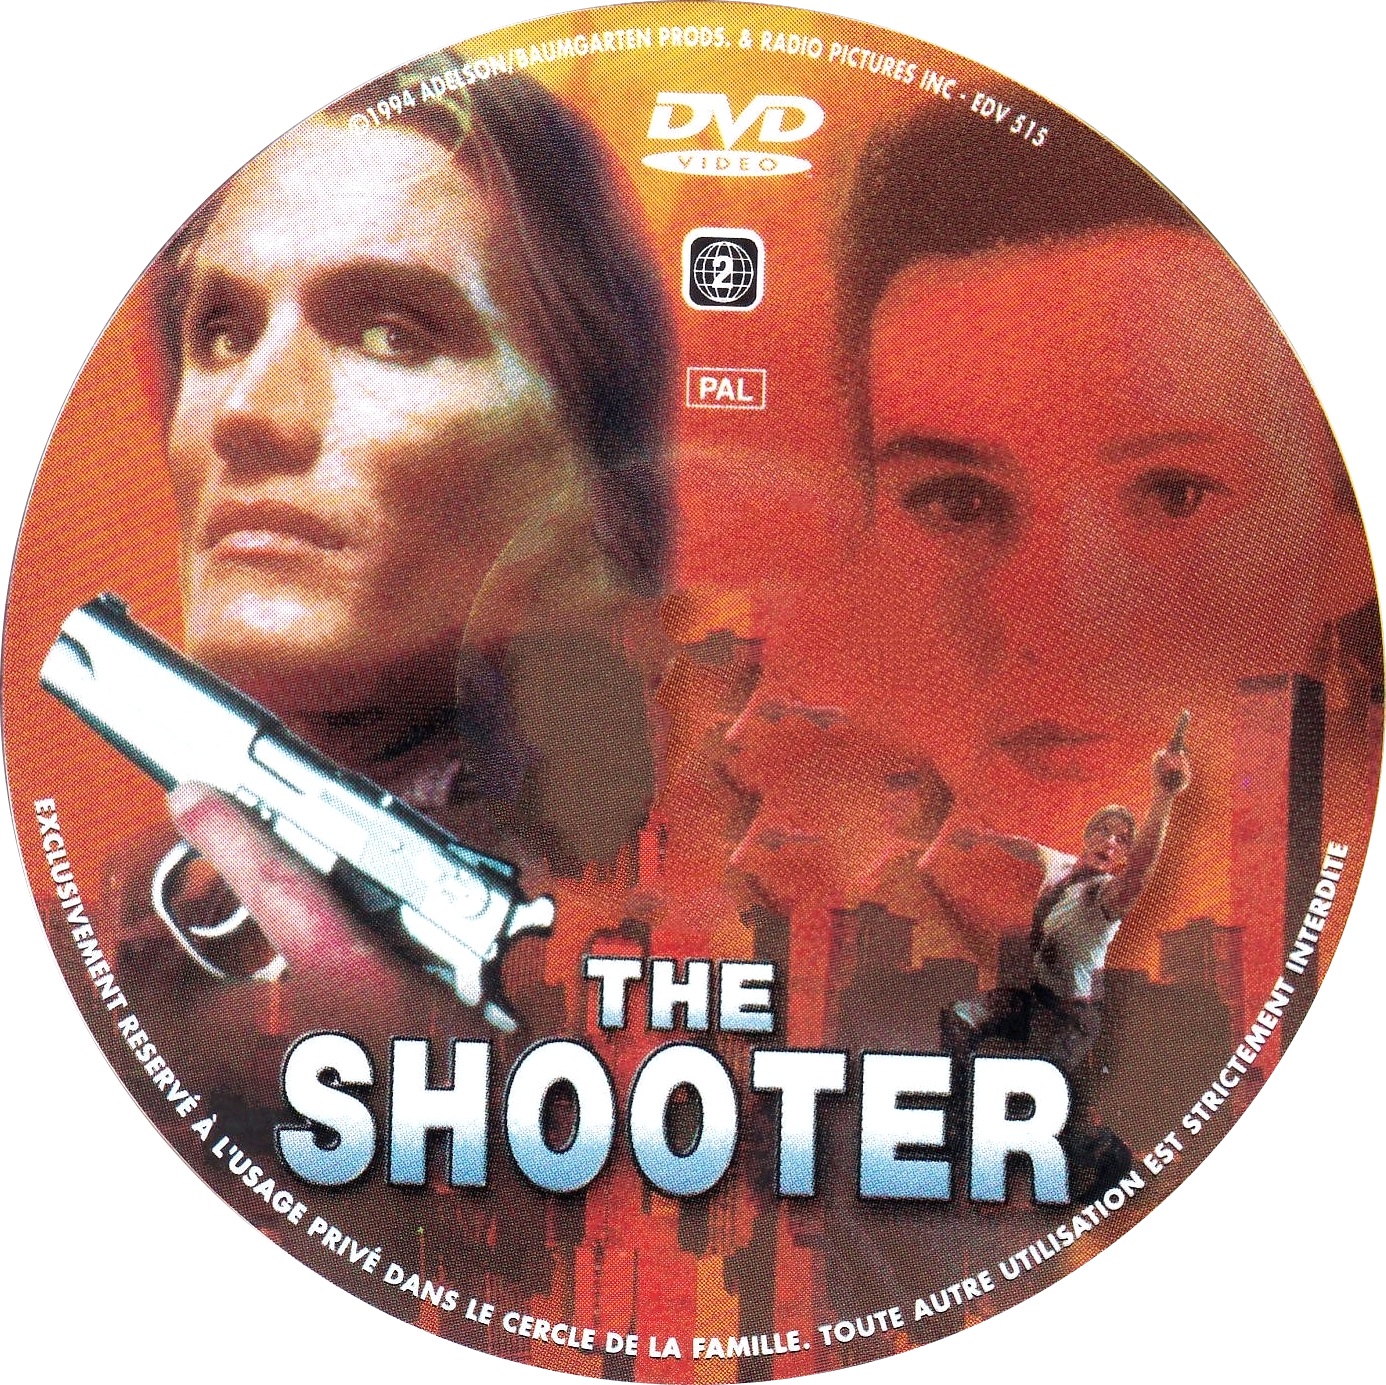 The shooter